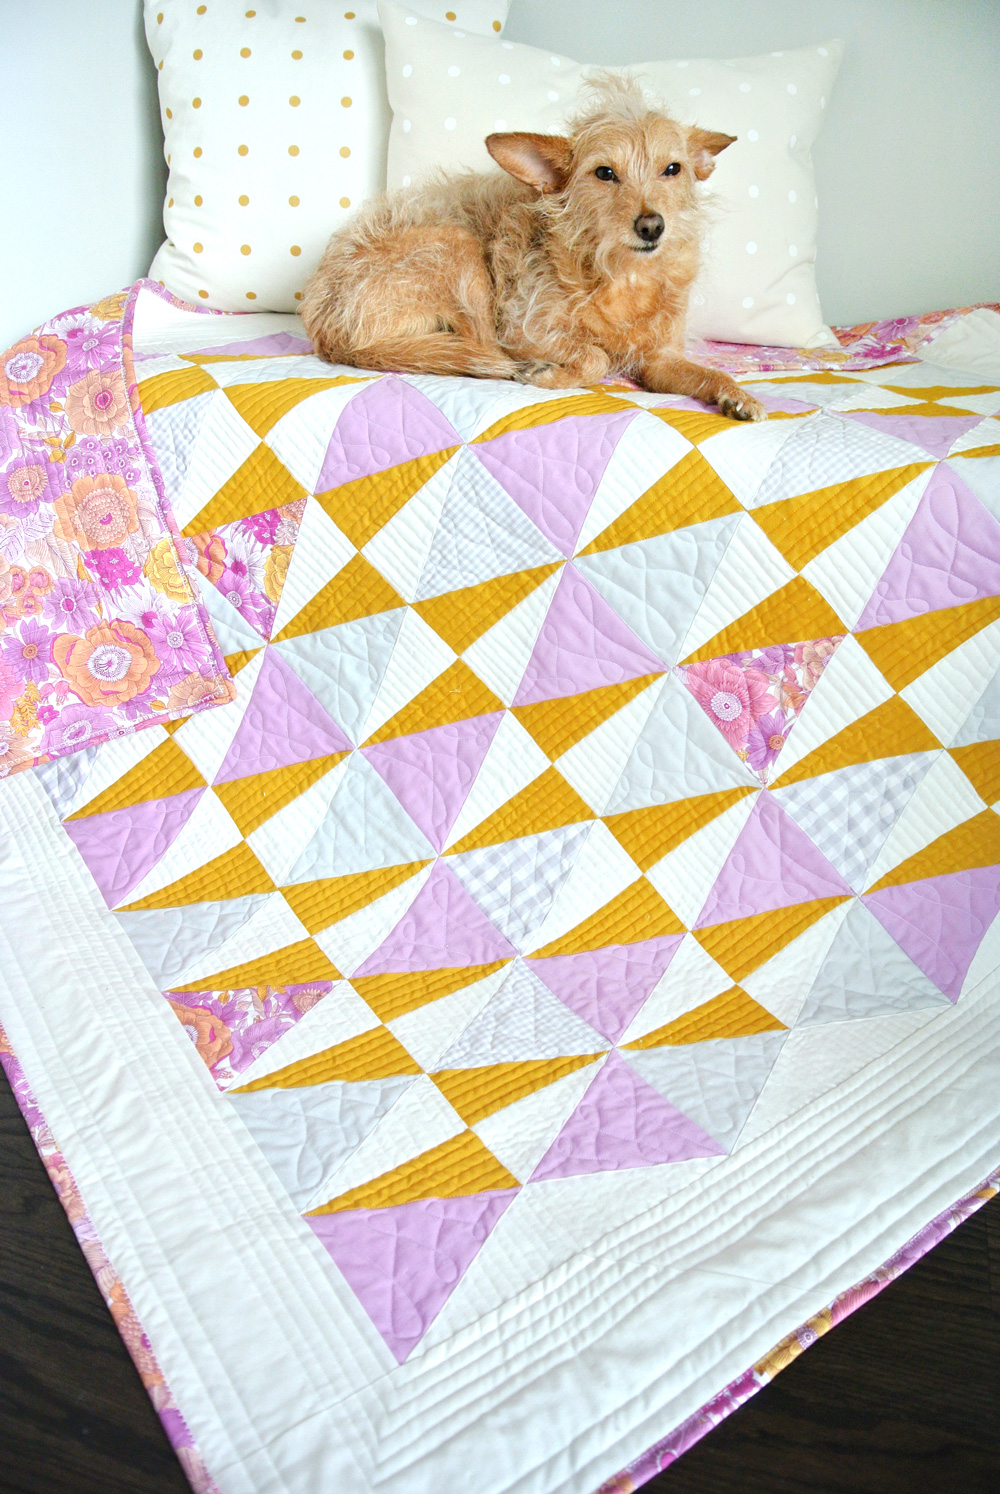 This FREE quilt pattern download, Liberty & Flowers, uses templates, making it the perfect sewing project for fussy cutting and scrap fabric. suzyquilts.com #quiltpattern